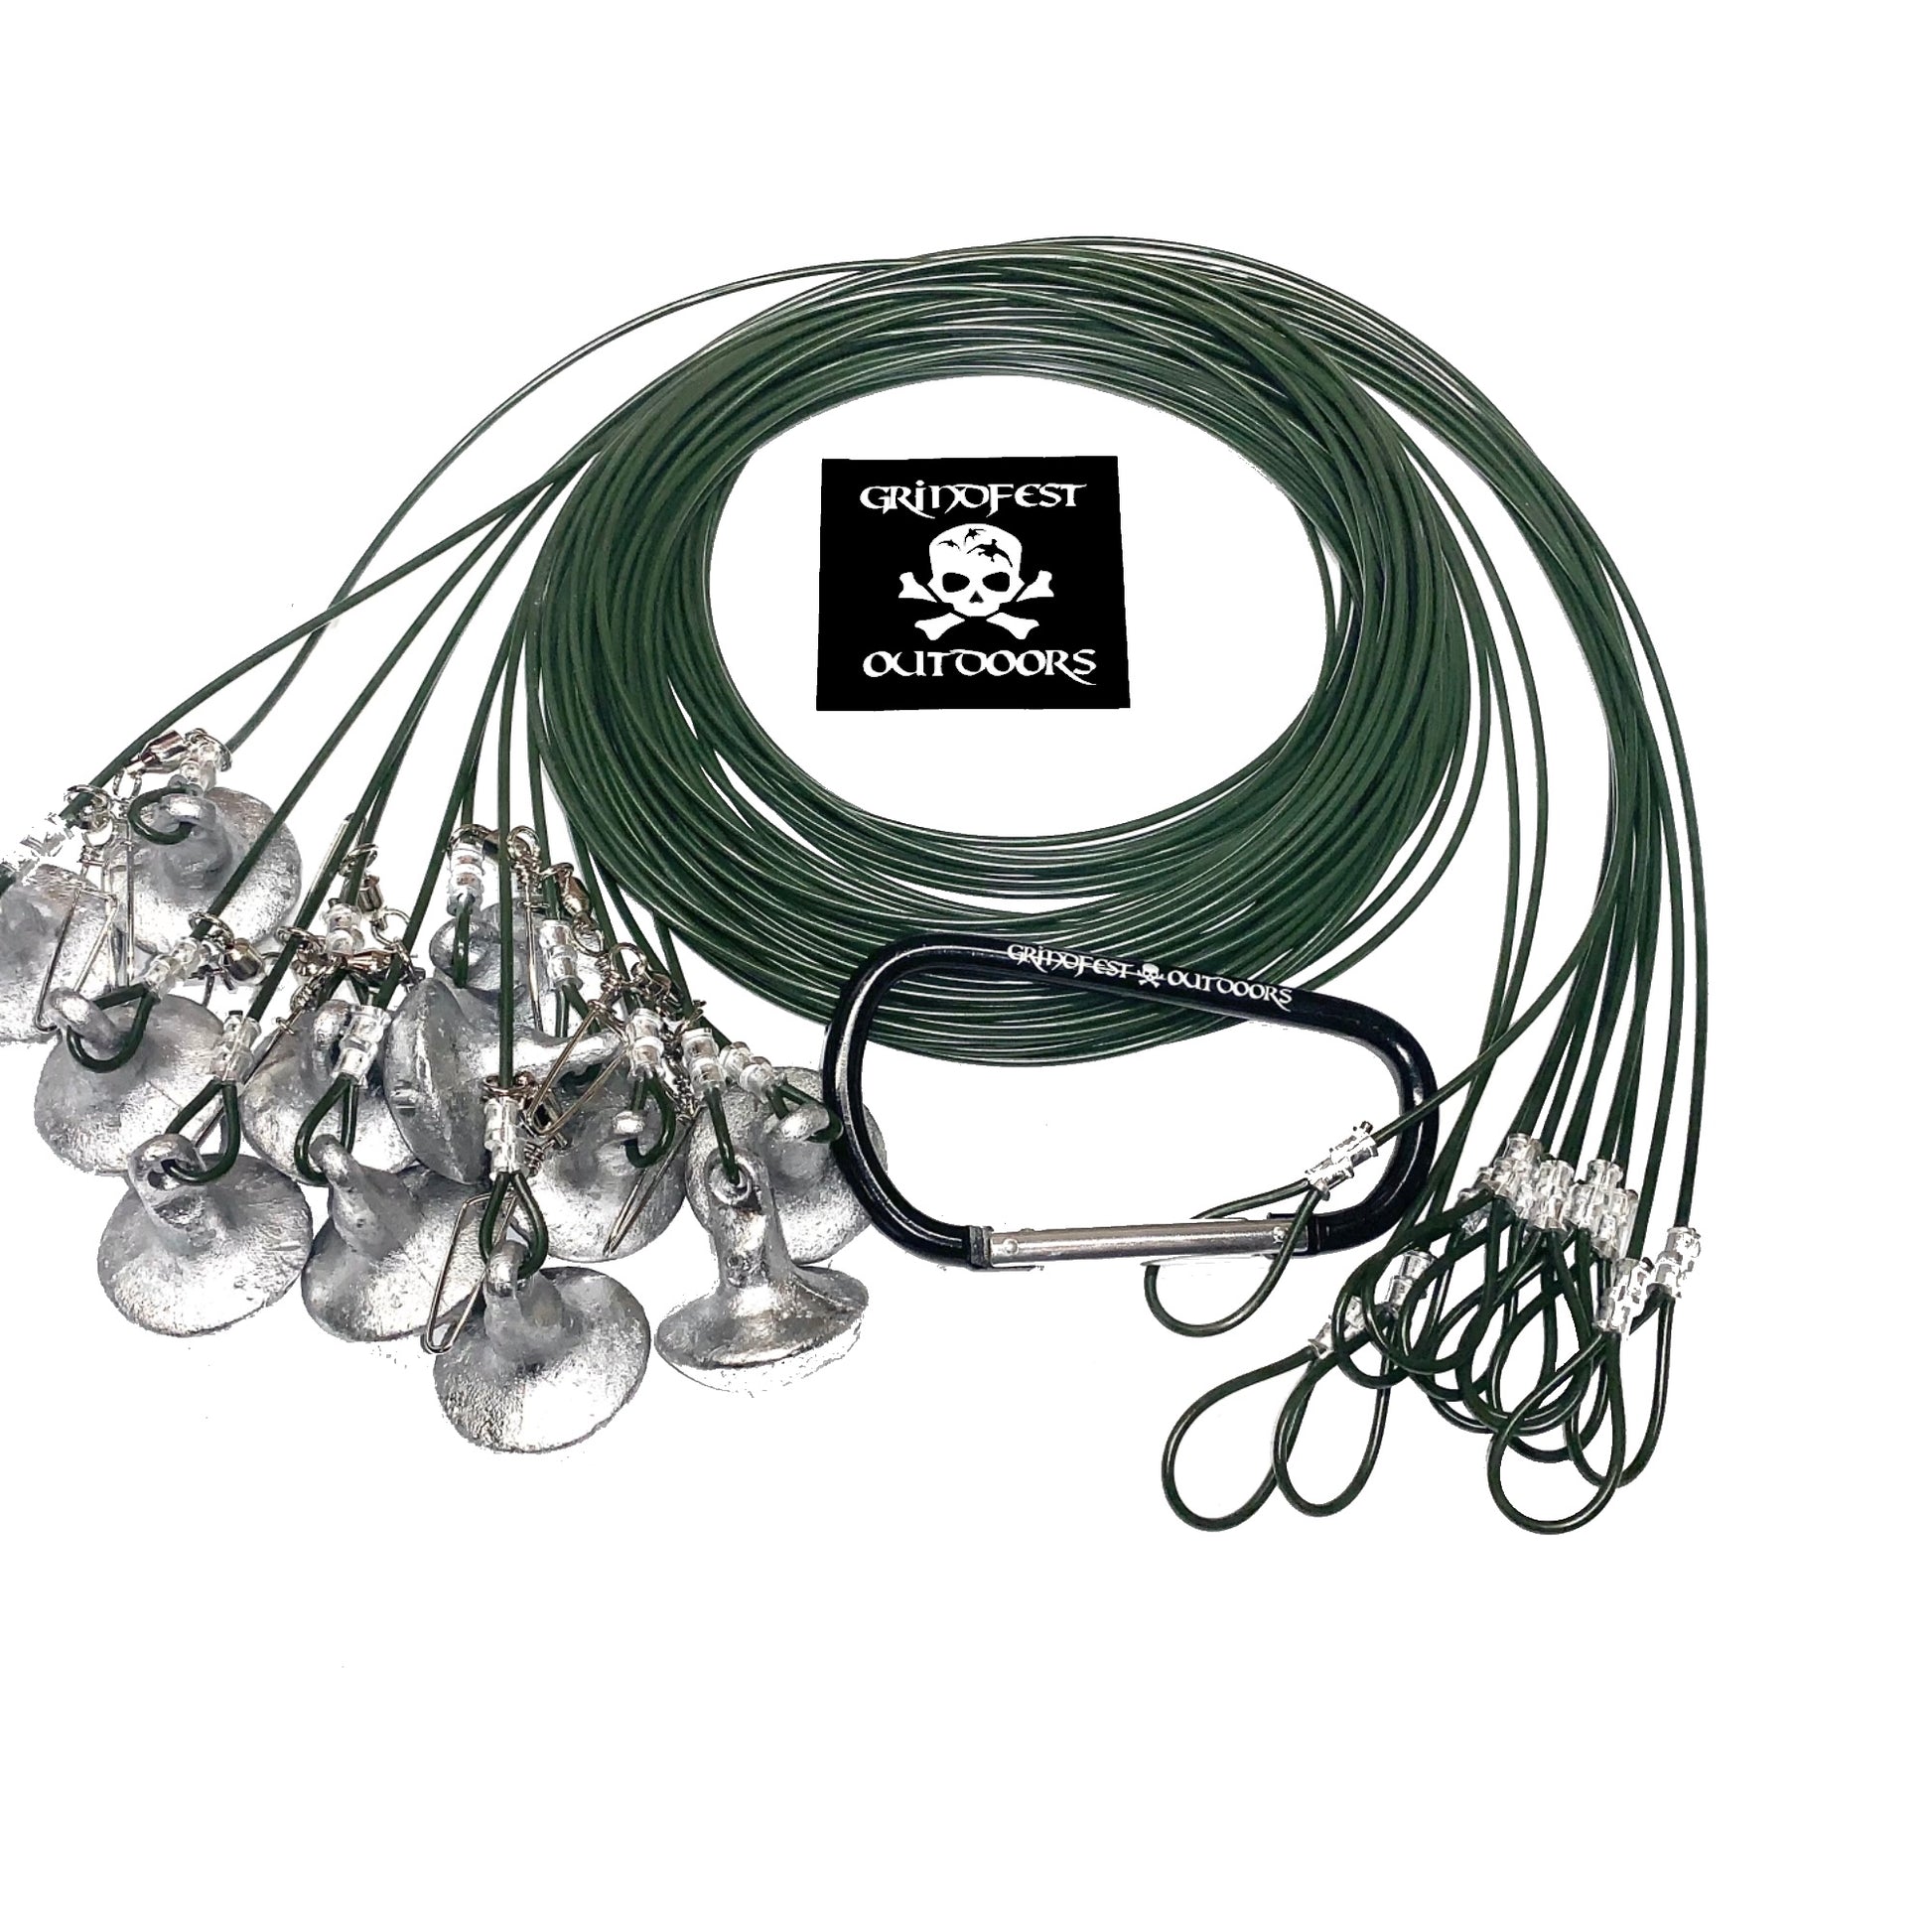 8oz Coated Steel Cable Texas Rigs – GrindFest Outdoors